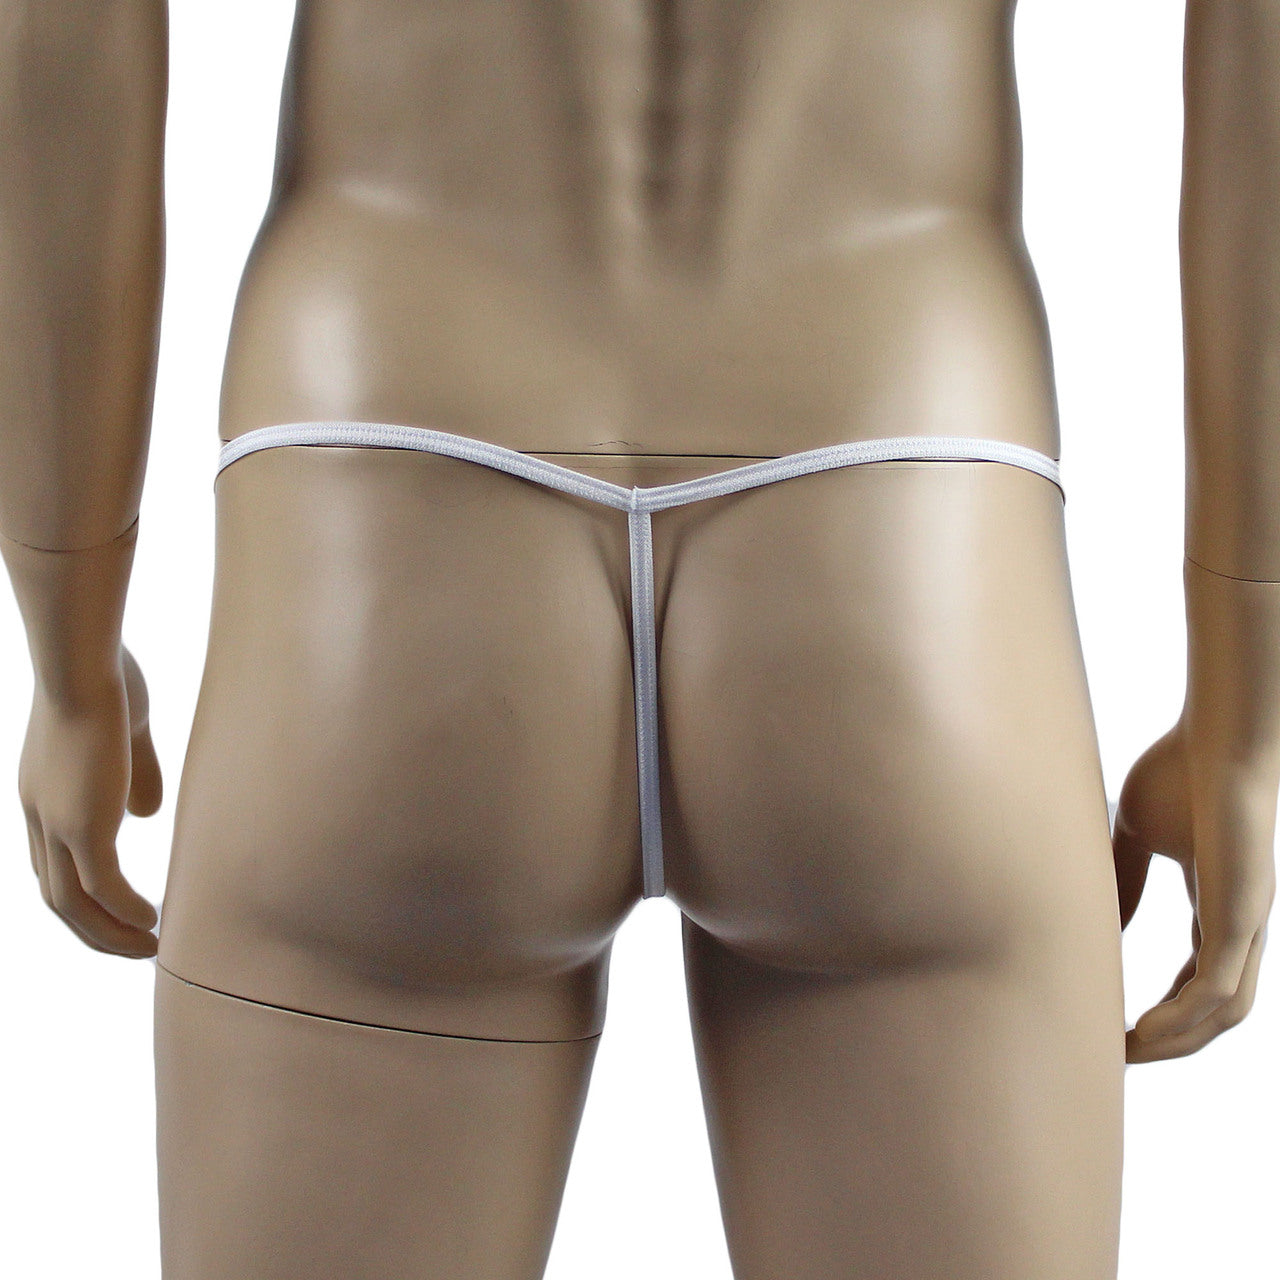 ns Stretch Spandex Pouch G string with Merry Christmas Bow Red and White